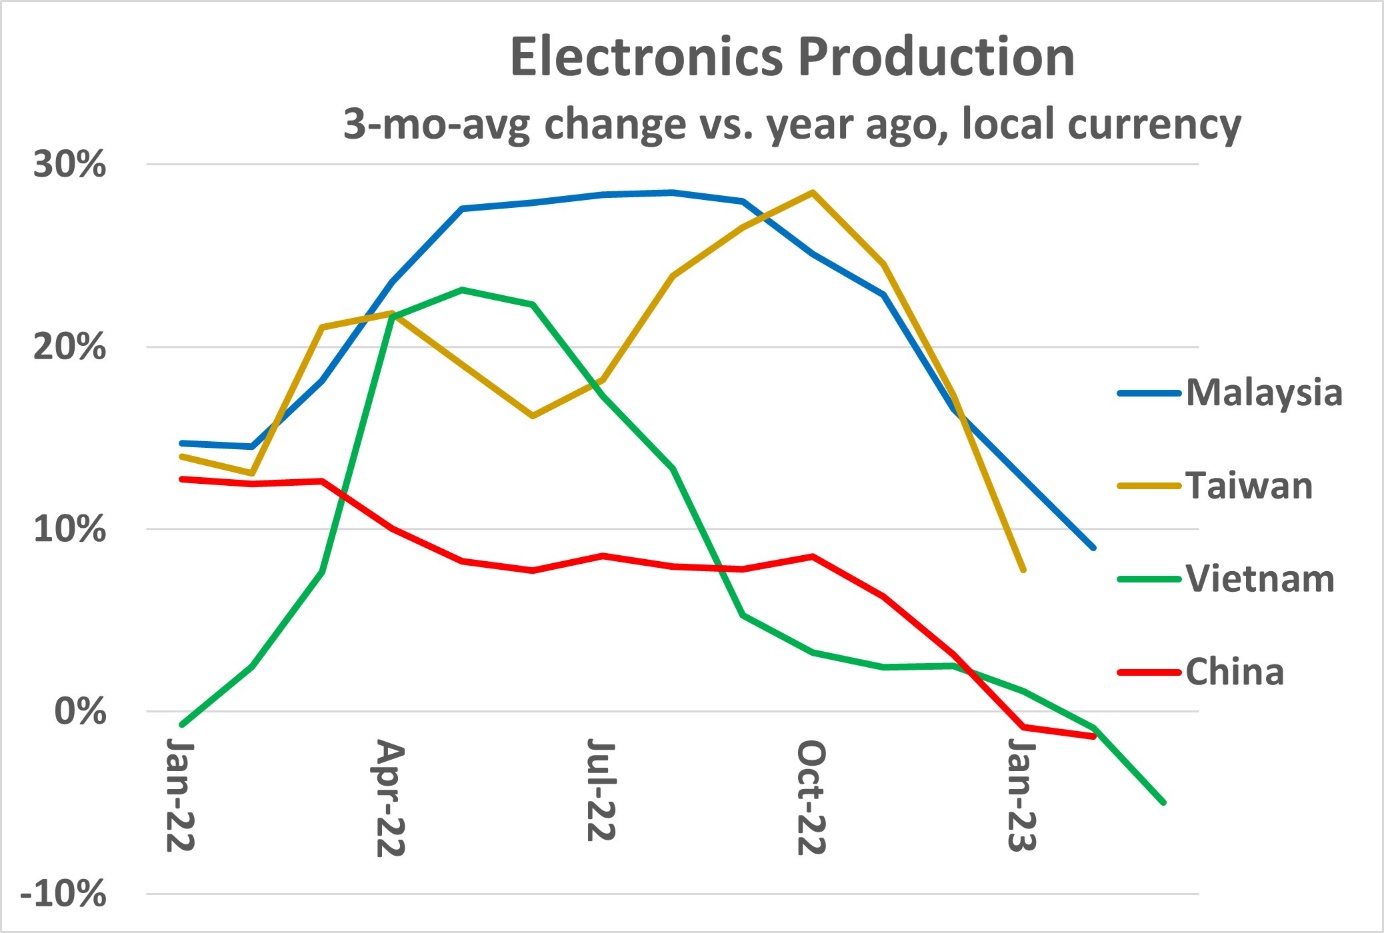 Electronics production in decline